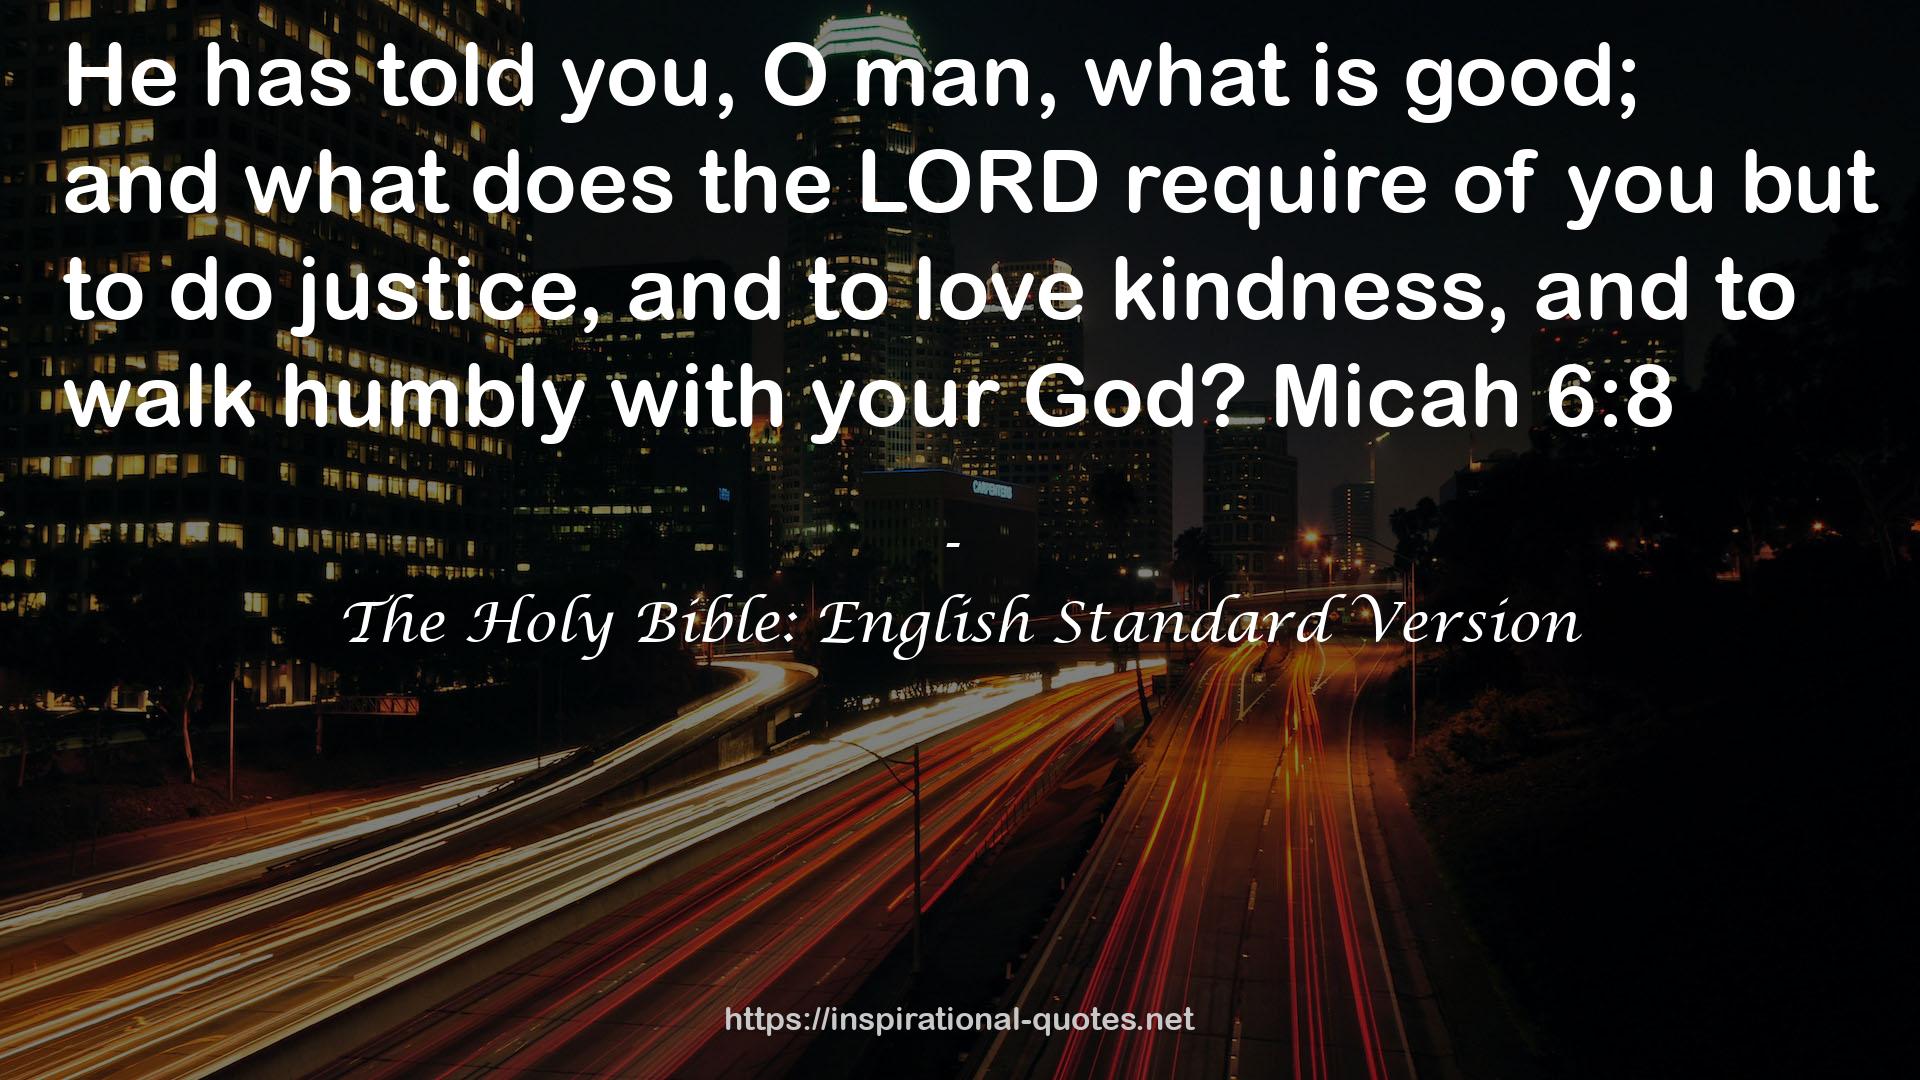 The Holy Bible: English Standard Version QUOTES